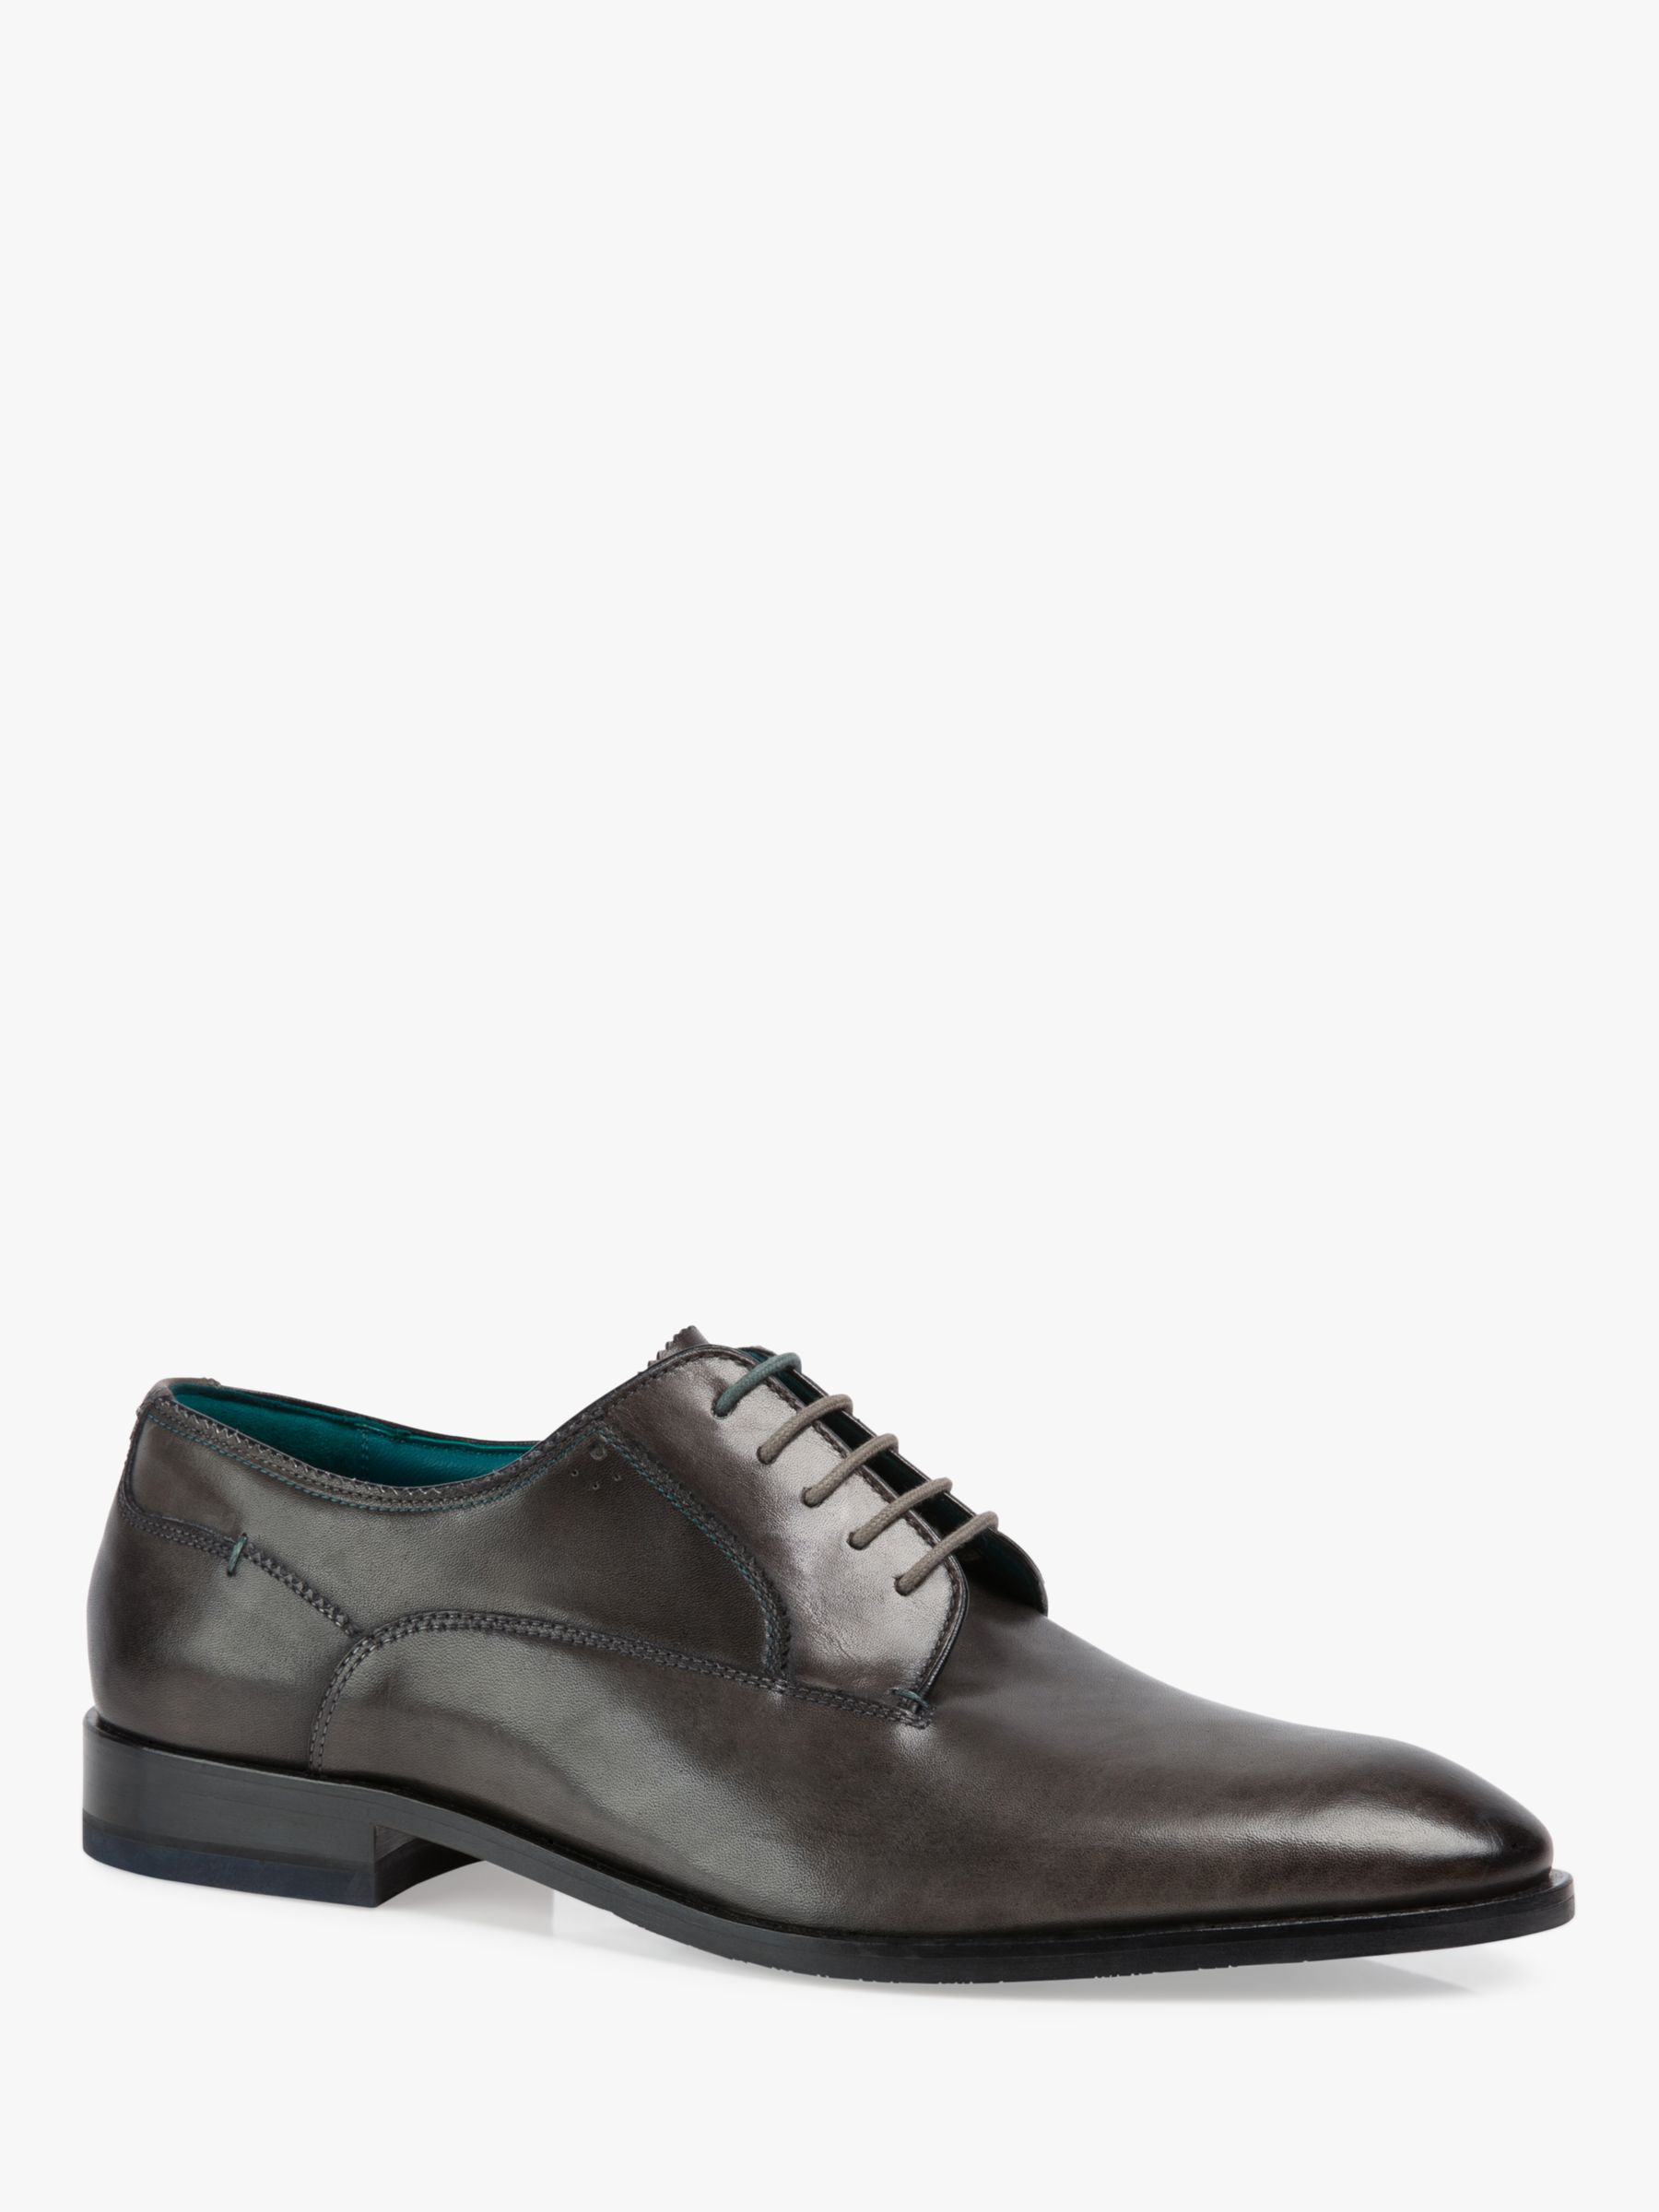 Ted Baker Parals Leather Derby Shoes, Grey